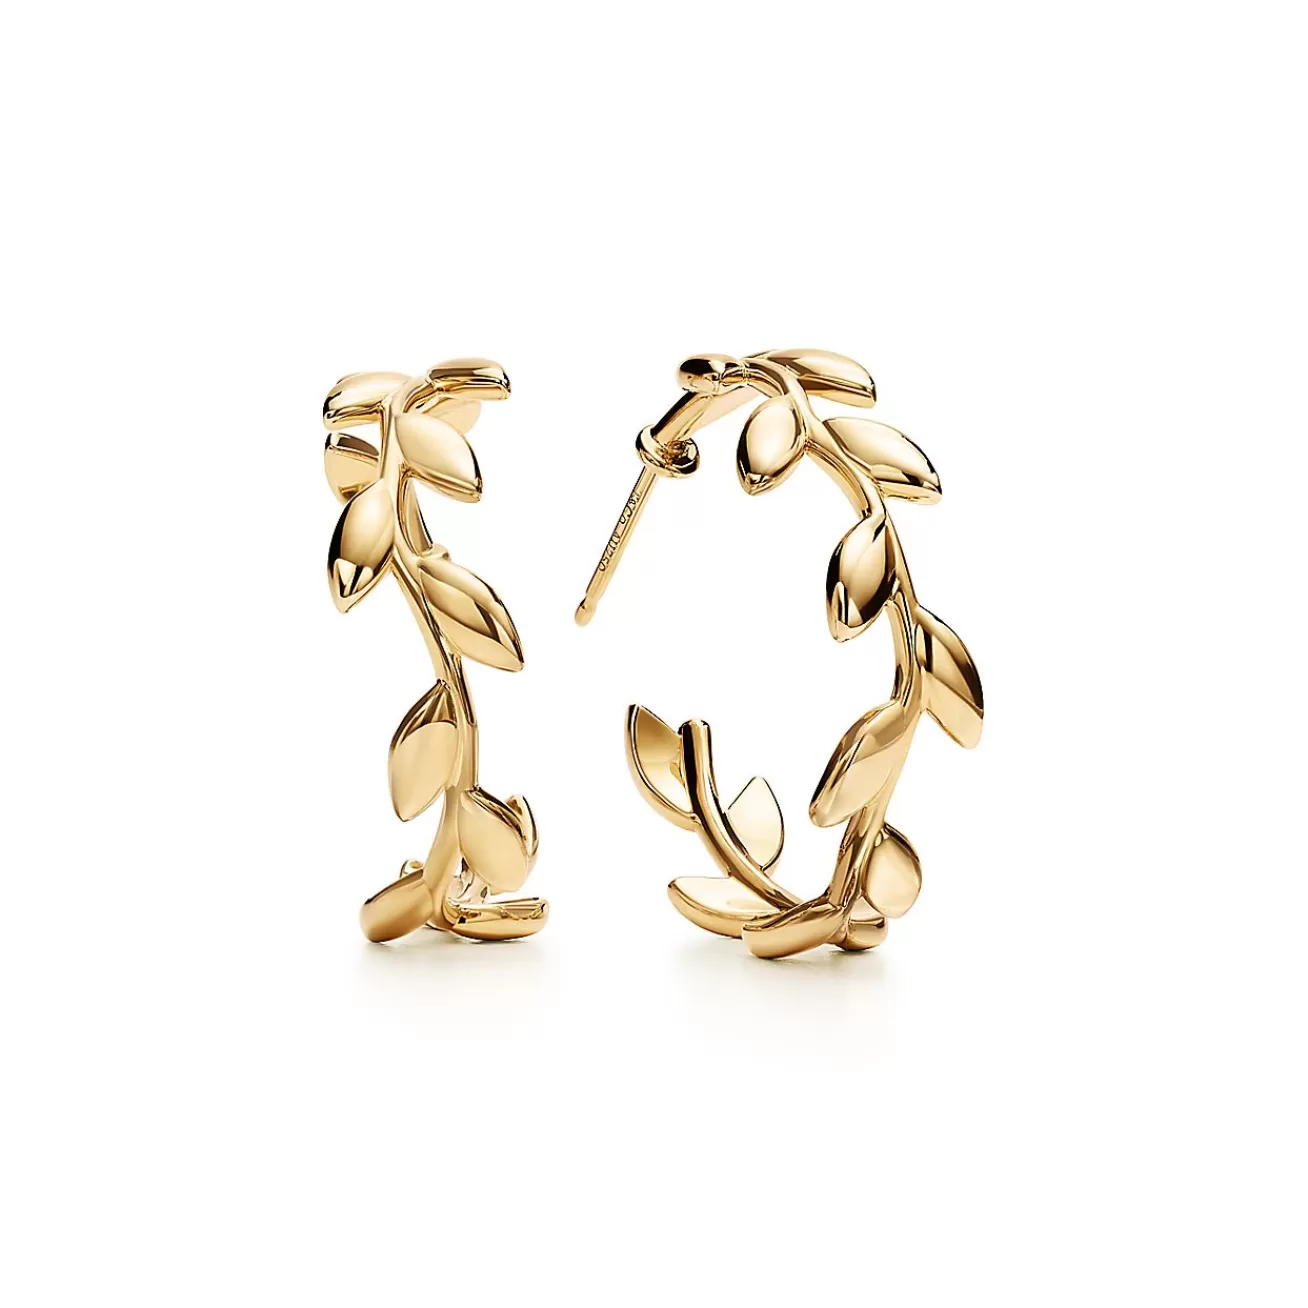 Tiffany & Co. Paloma Picasso® Olive Leaf hoop earrings in 18k gold. | ^ Earrings | Gifts for Her